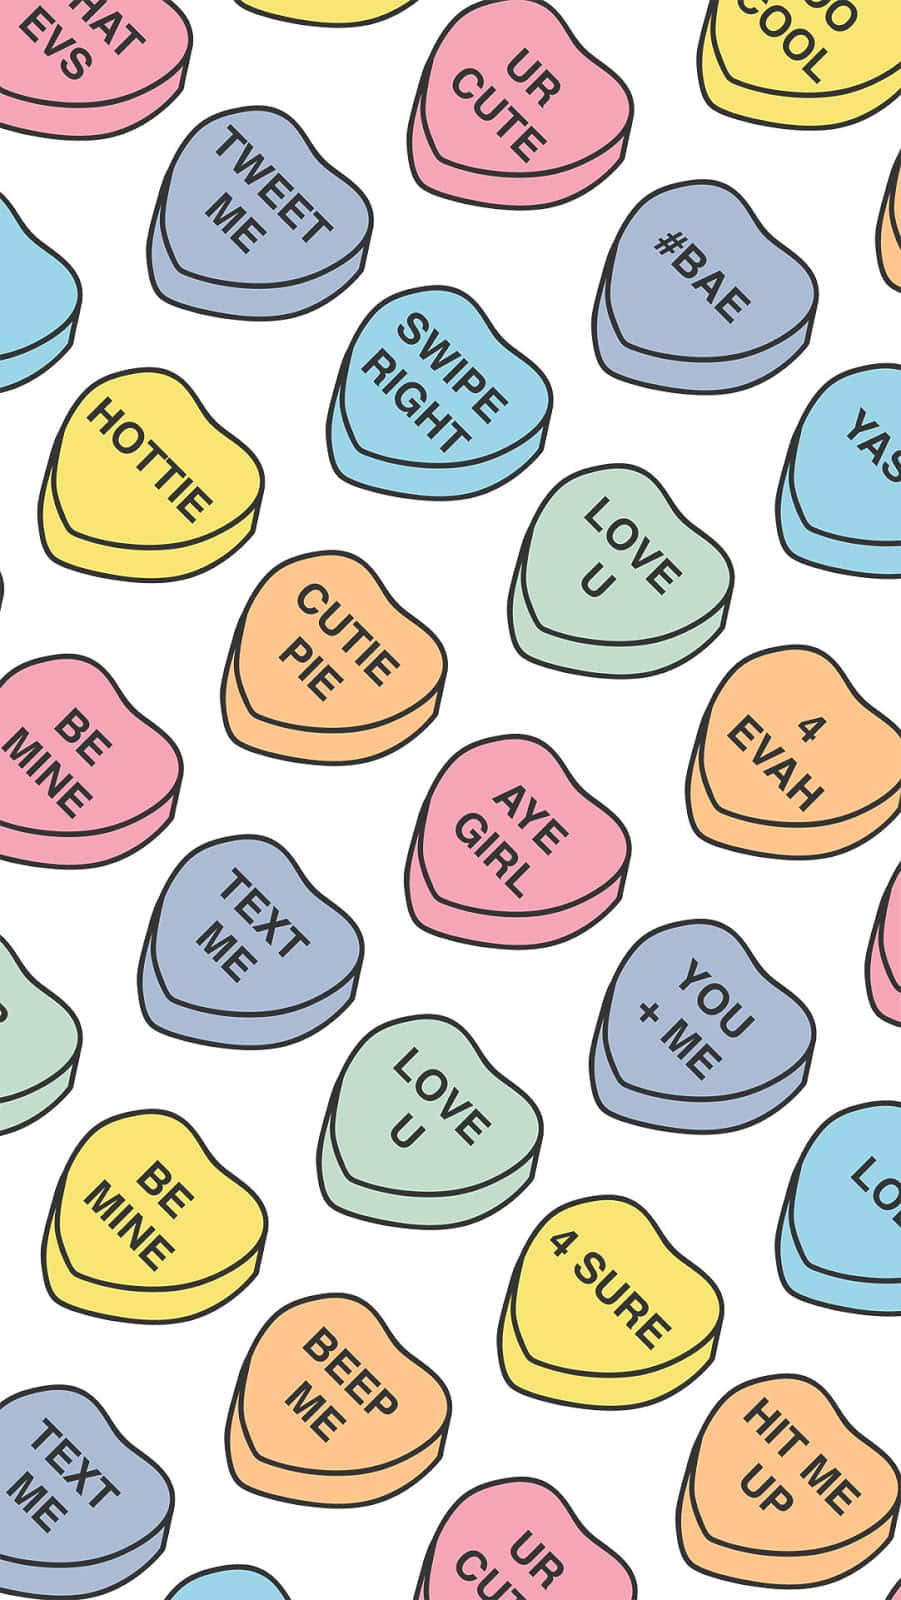 Candy Hearts With Different Words On Them